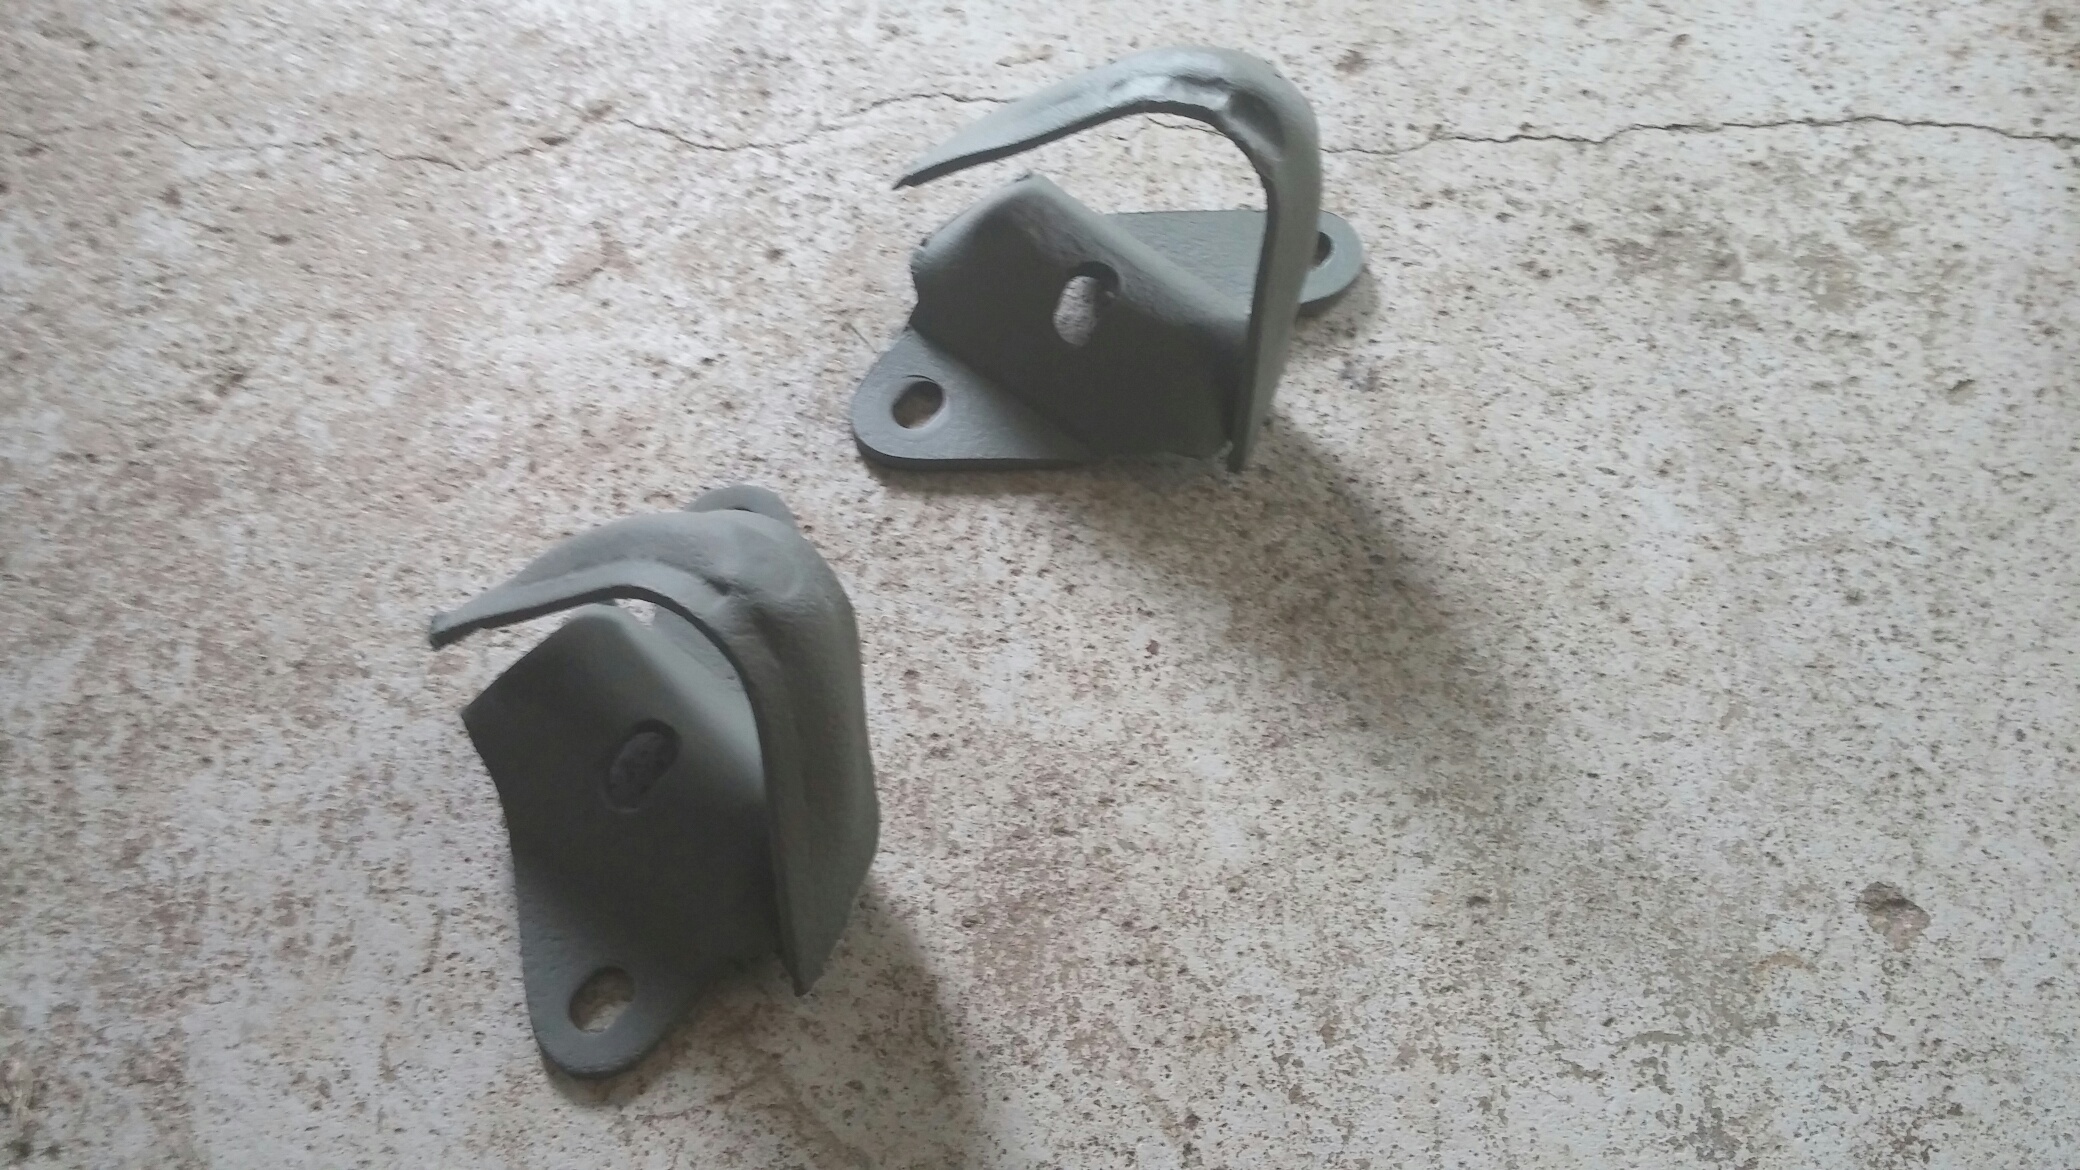 Attached picture swaybarbushingbrackets.jpg